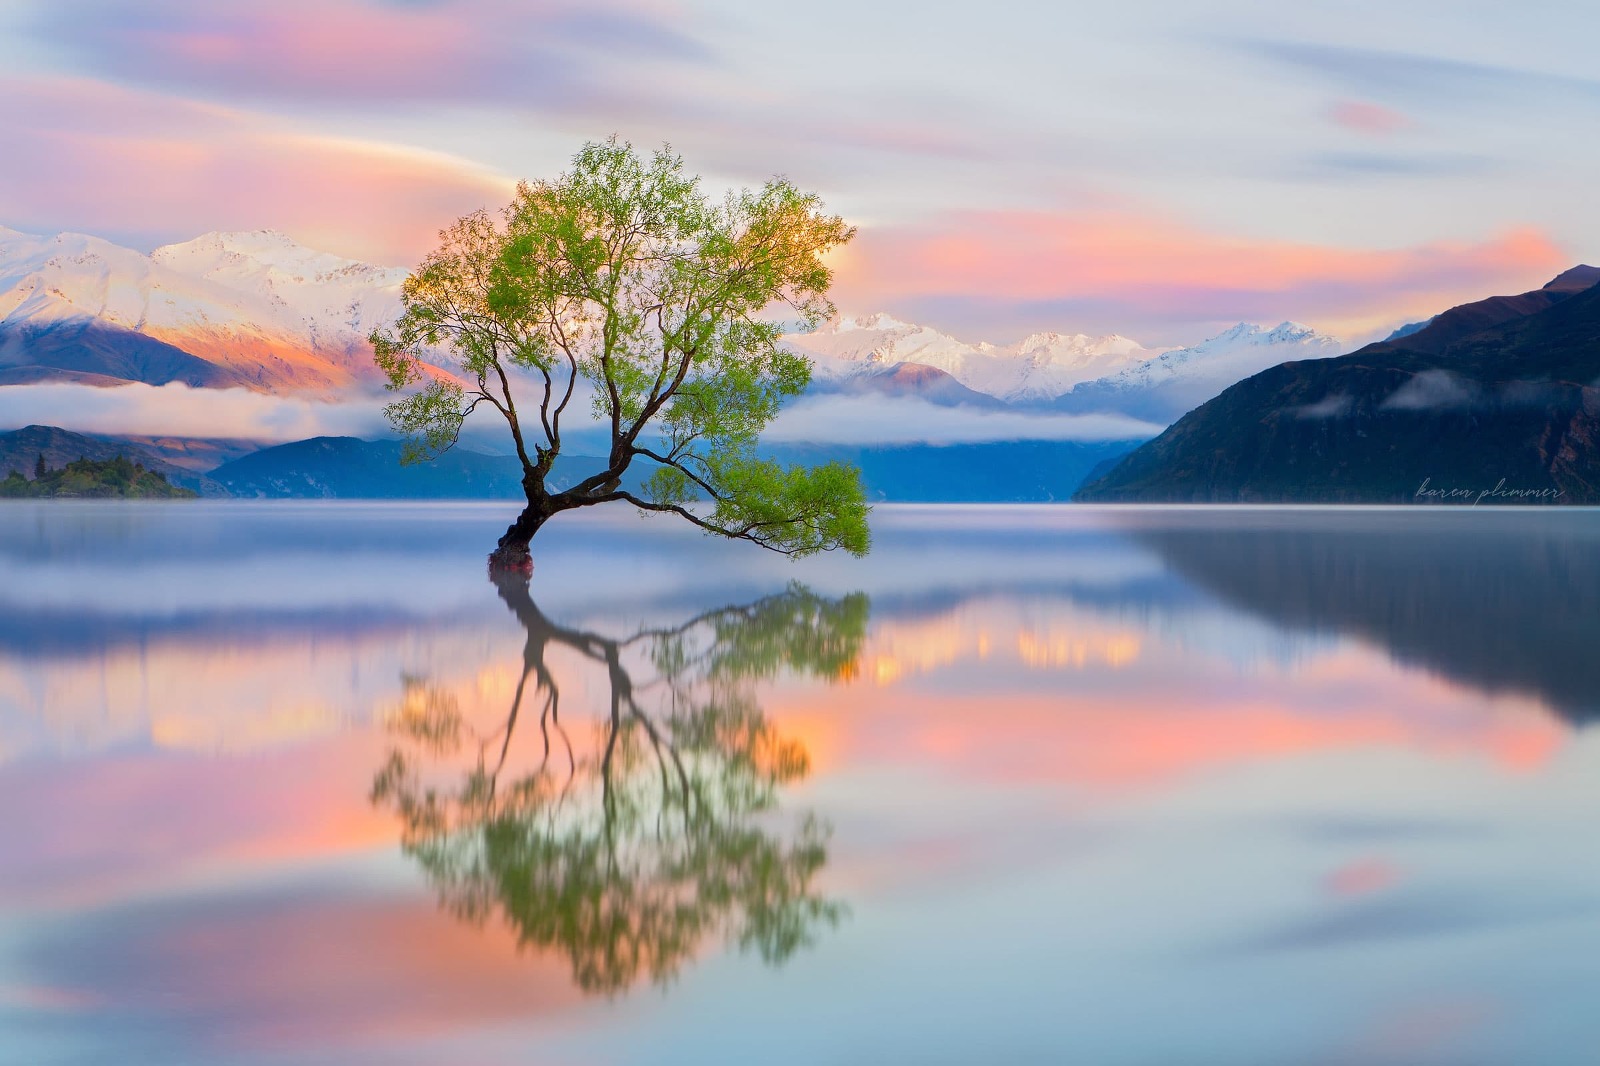 Willow tree reflected in Lake Wanaka with gentle sunrise colours giving a feeling of serenity